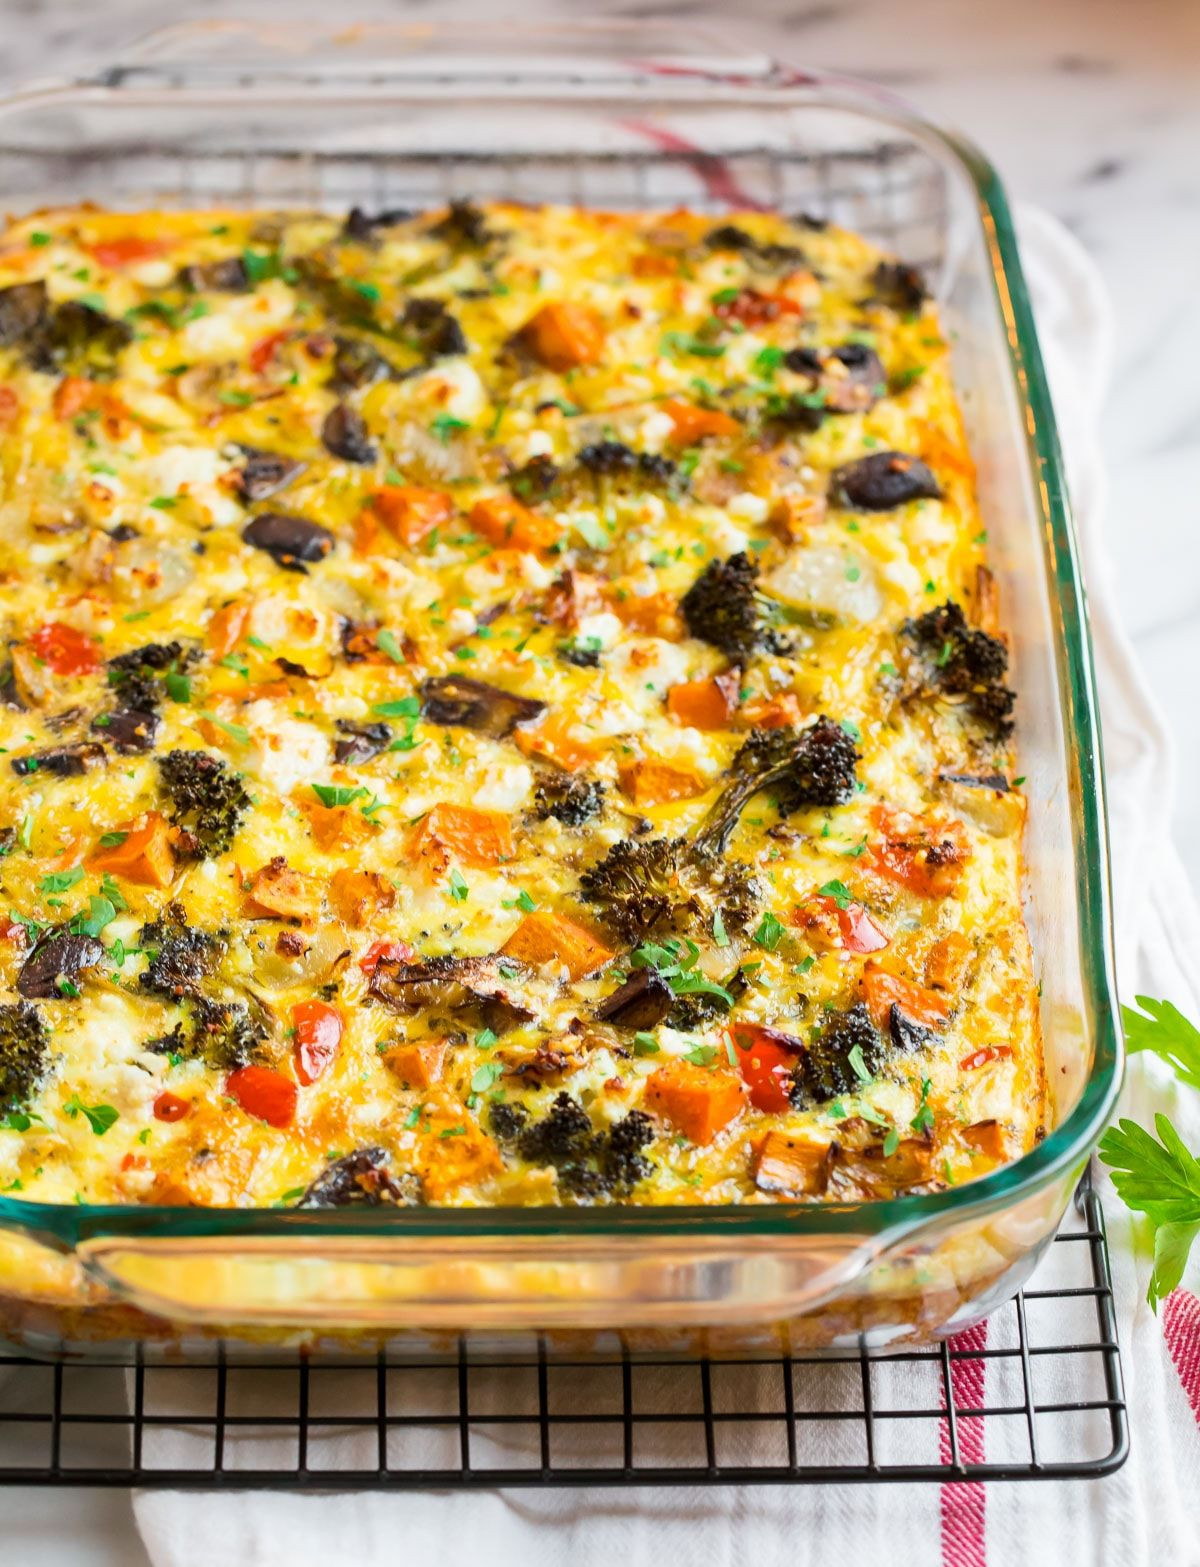 Vegan Breakfast Casserole Make Ahead
 If you re looking for an easy and healthy make ahead